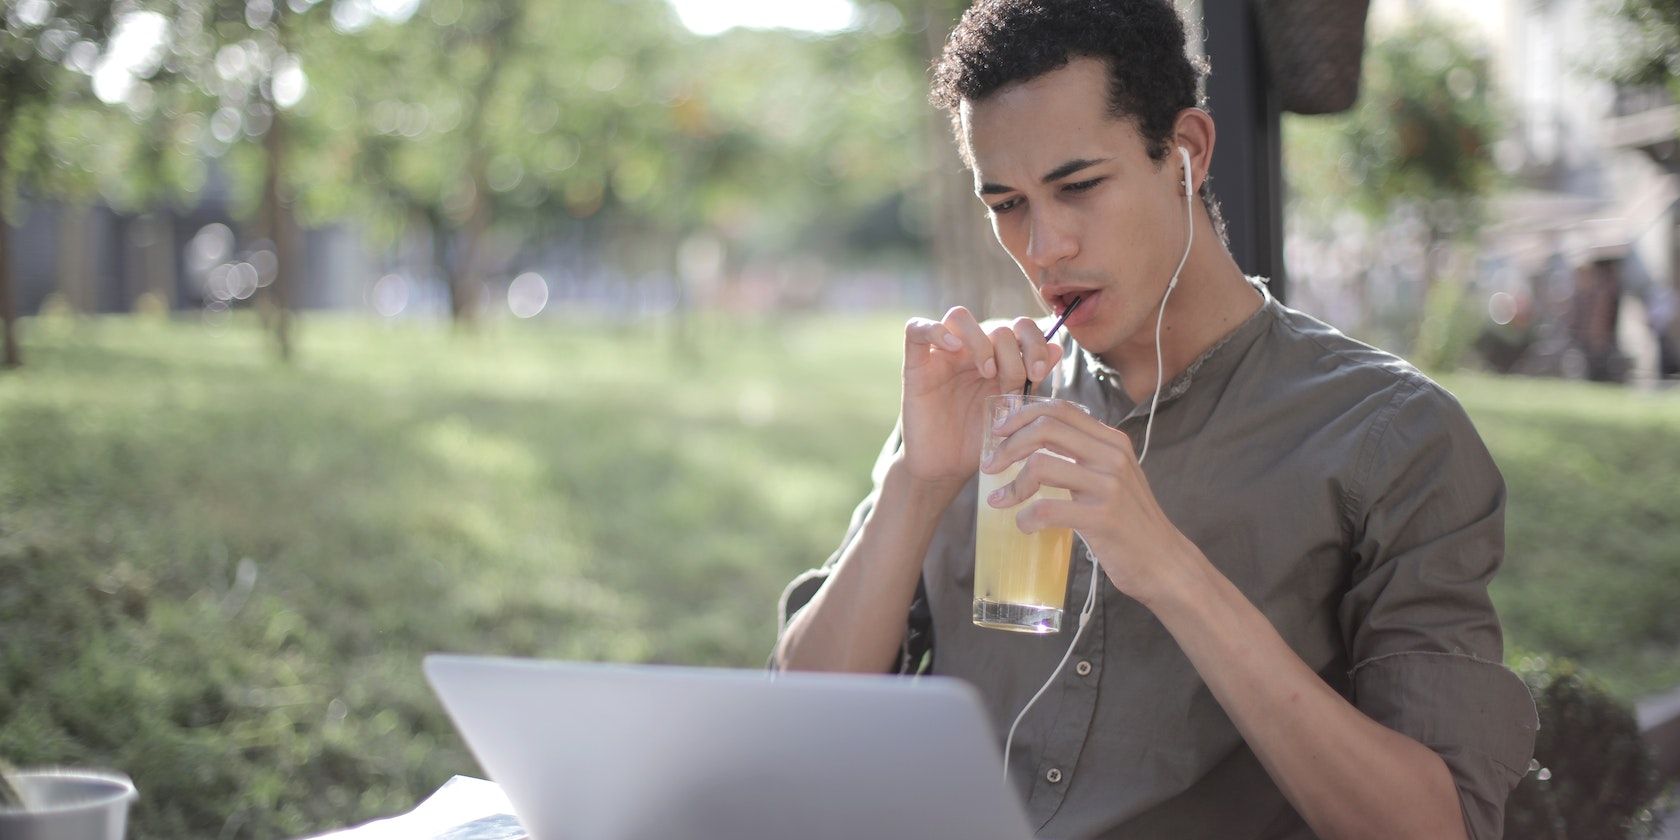 Man listening to music on a laptop